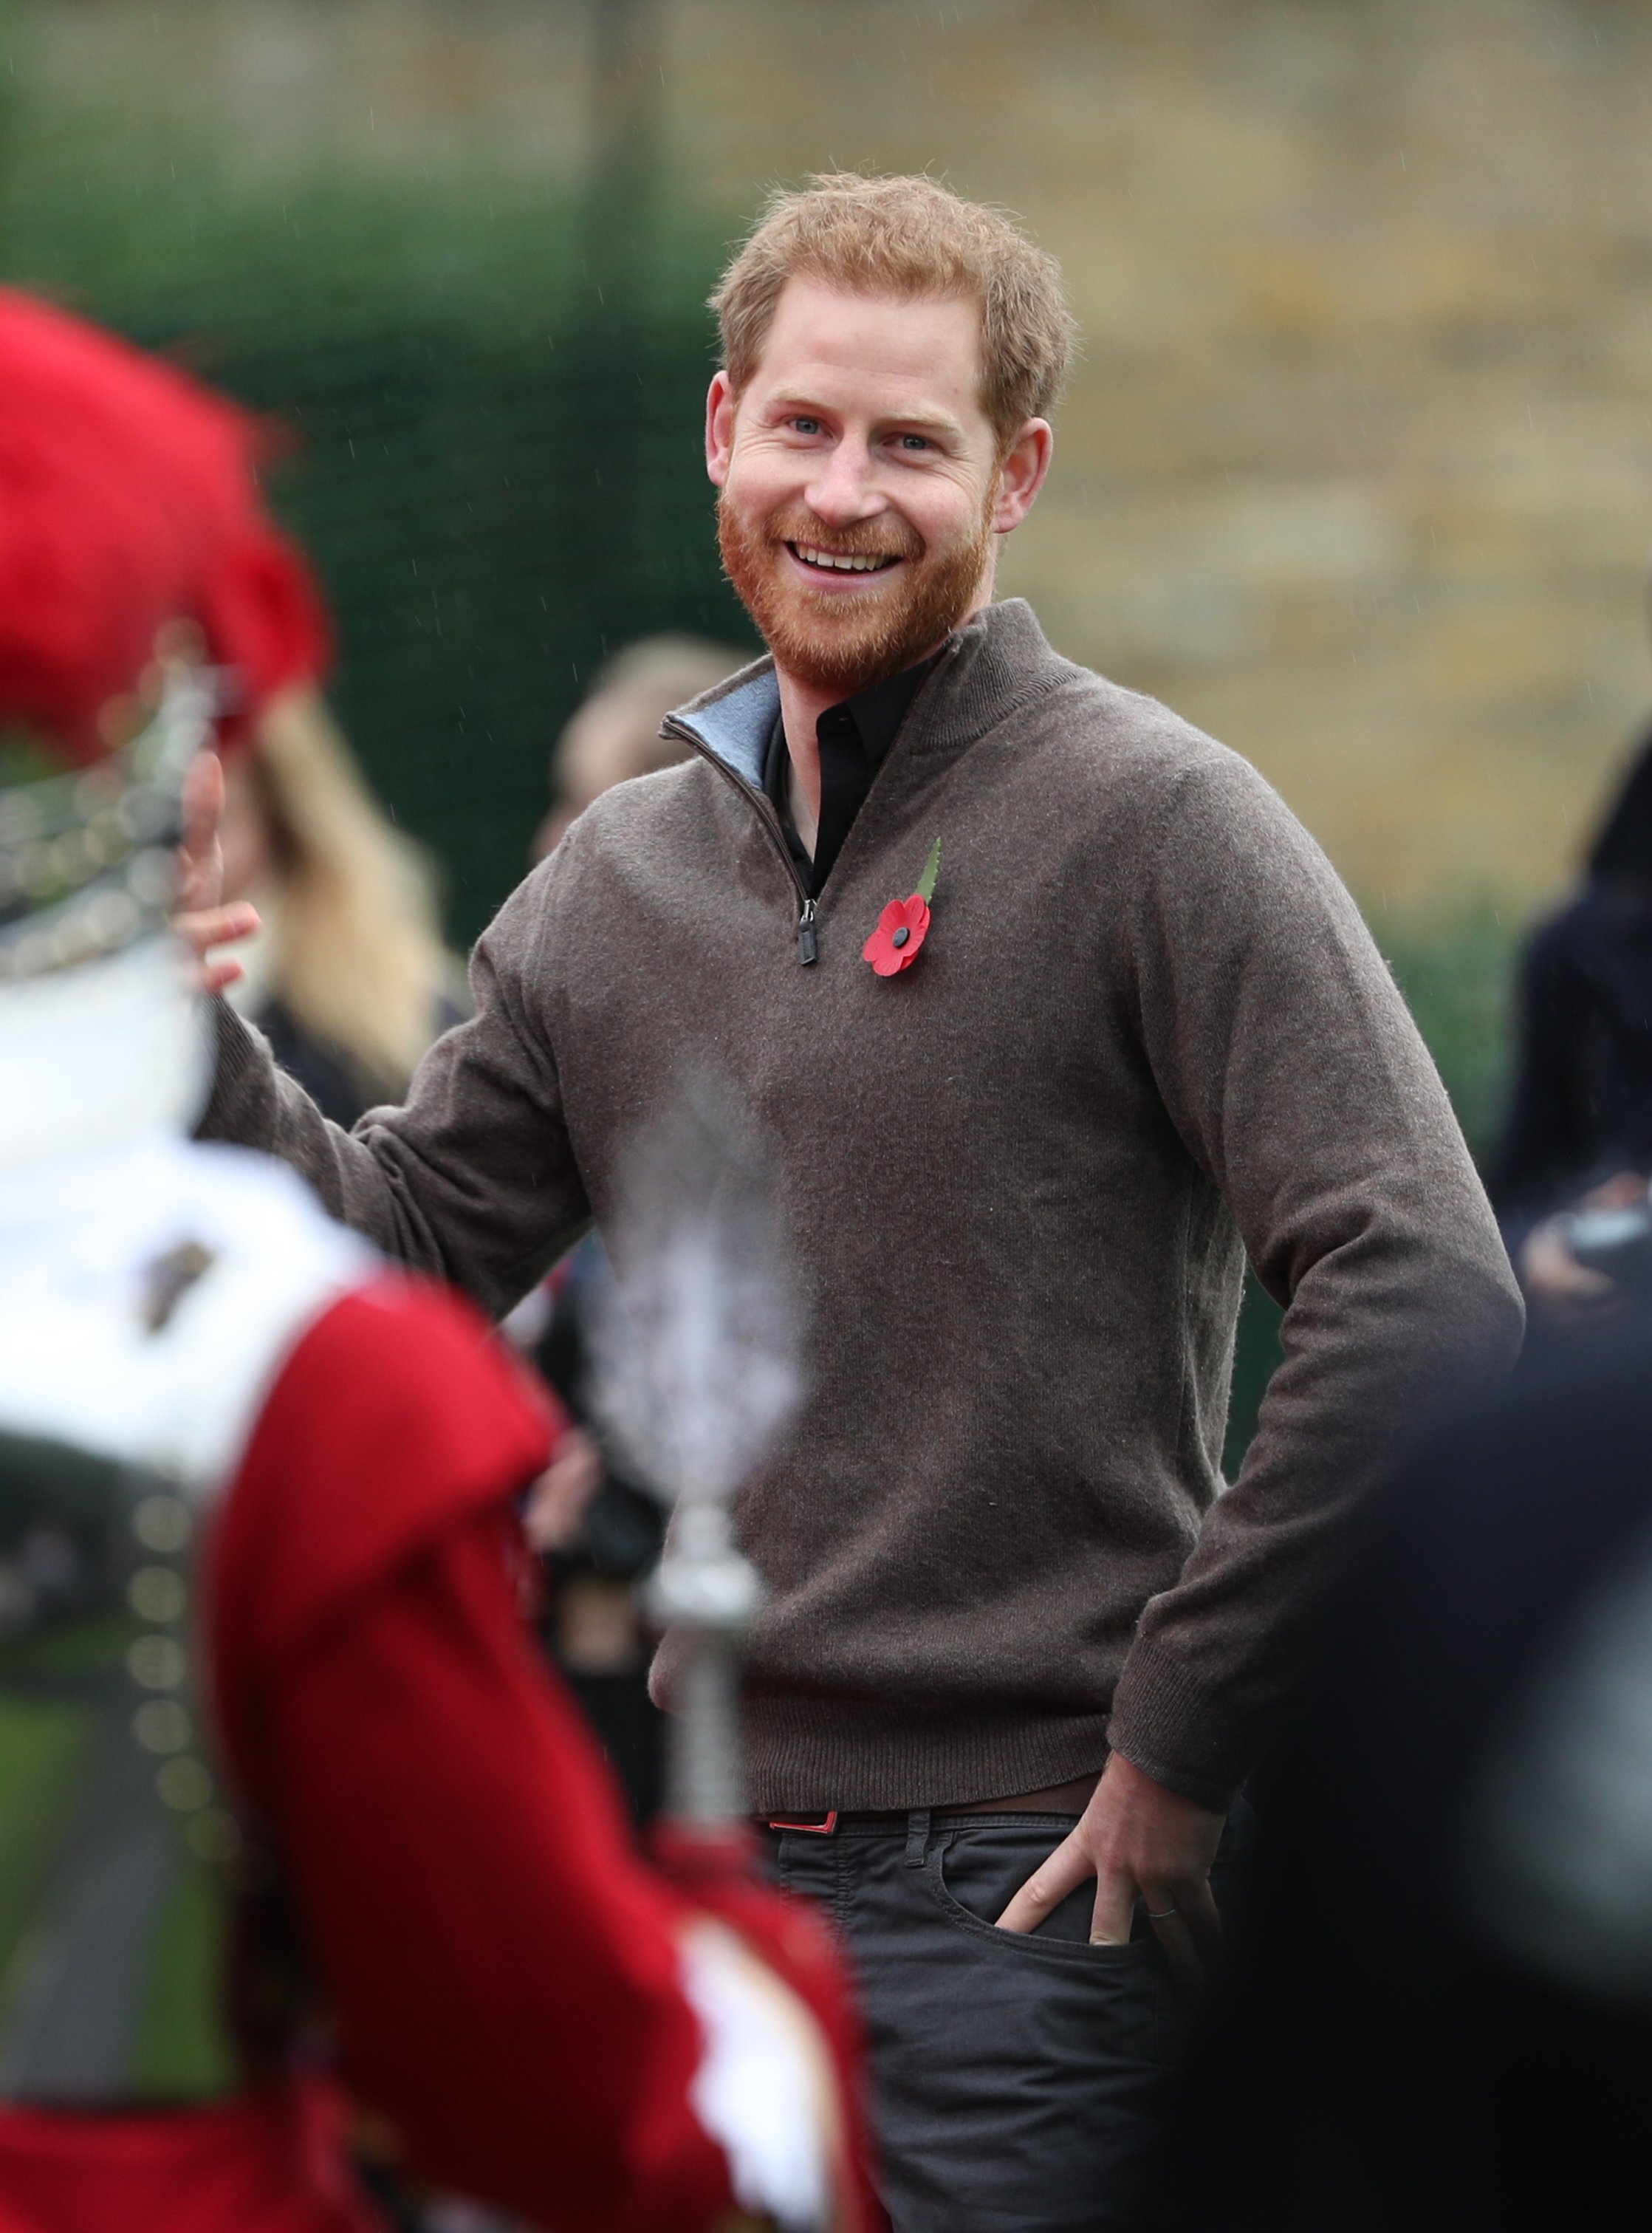 Prince Harry at the launch of Team UK for the Invictus Games in London on October 29, 2019. | Source: Getty Images